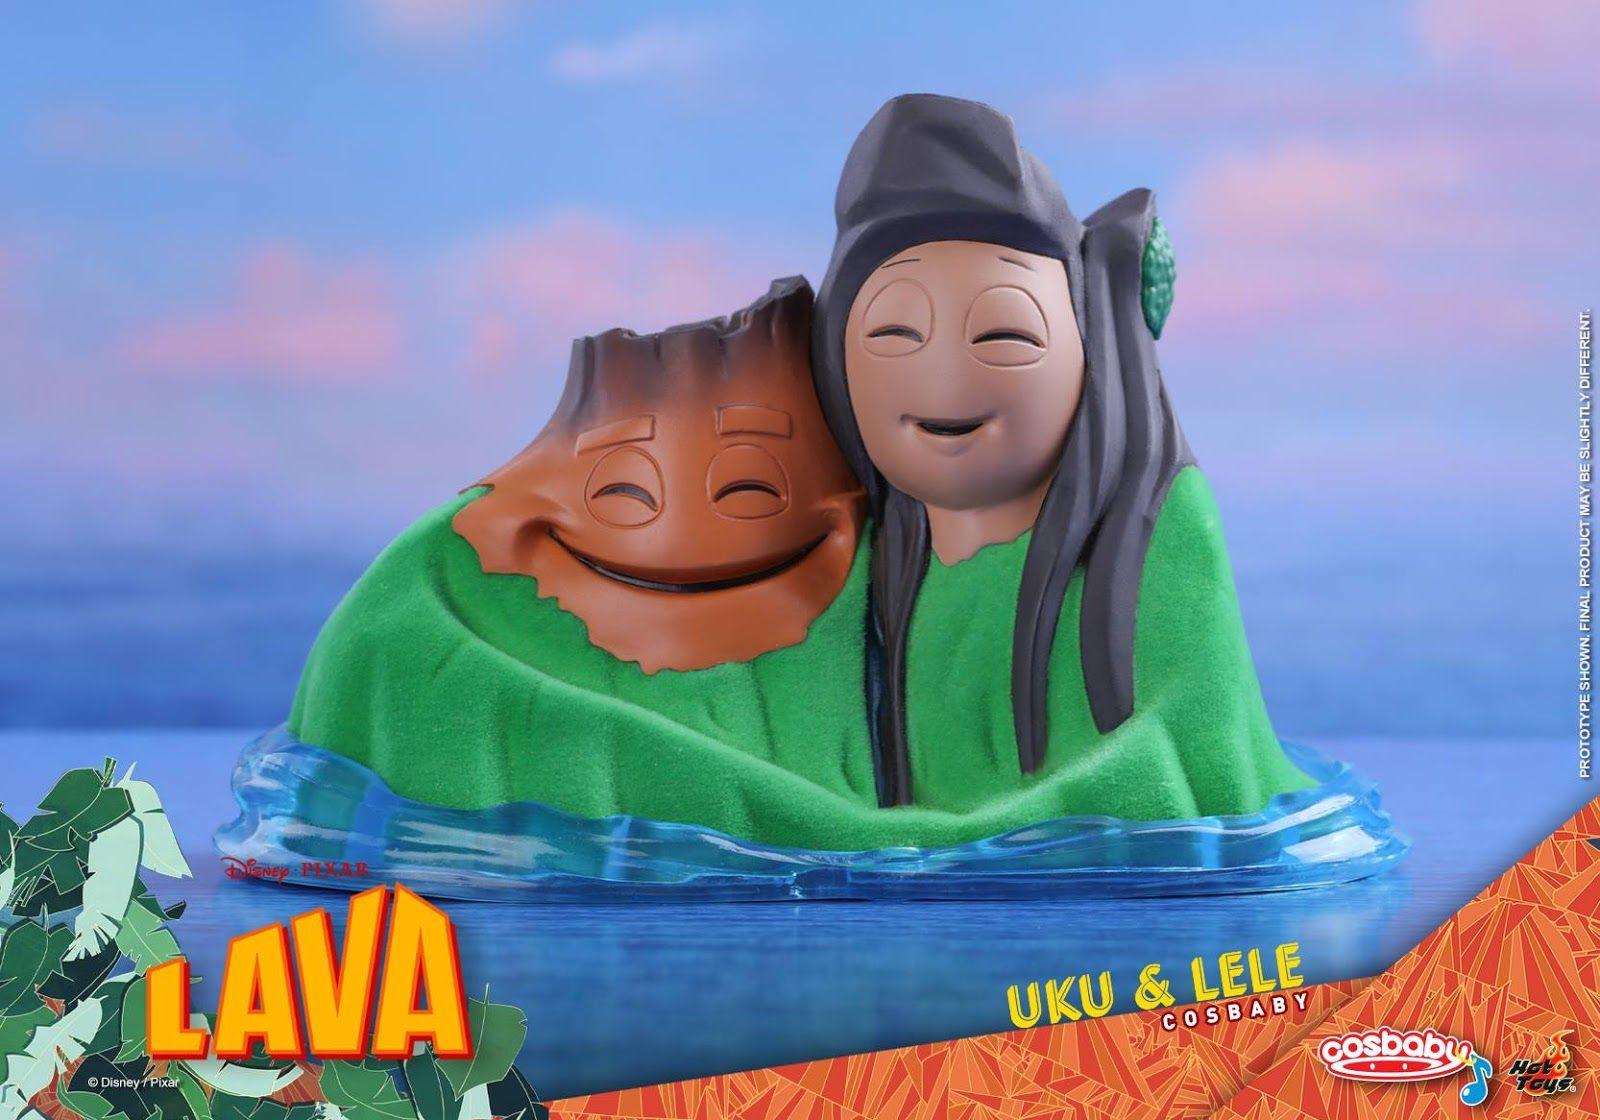 Disney Pixar Lava Logo - This LAVA Uku & Lele Cosbaby From Hot Toys May be the Most